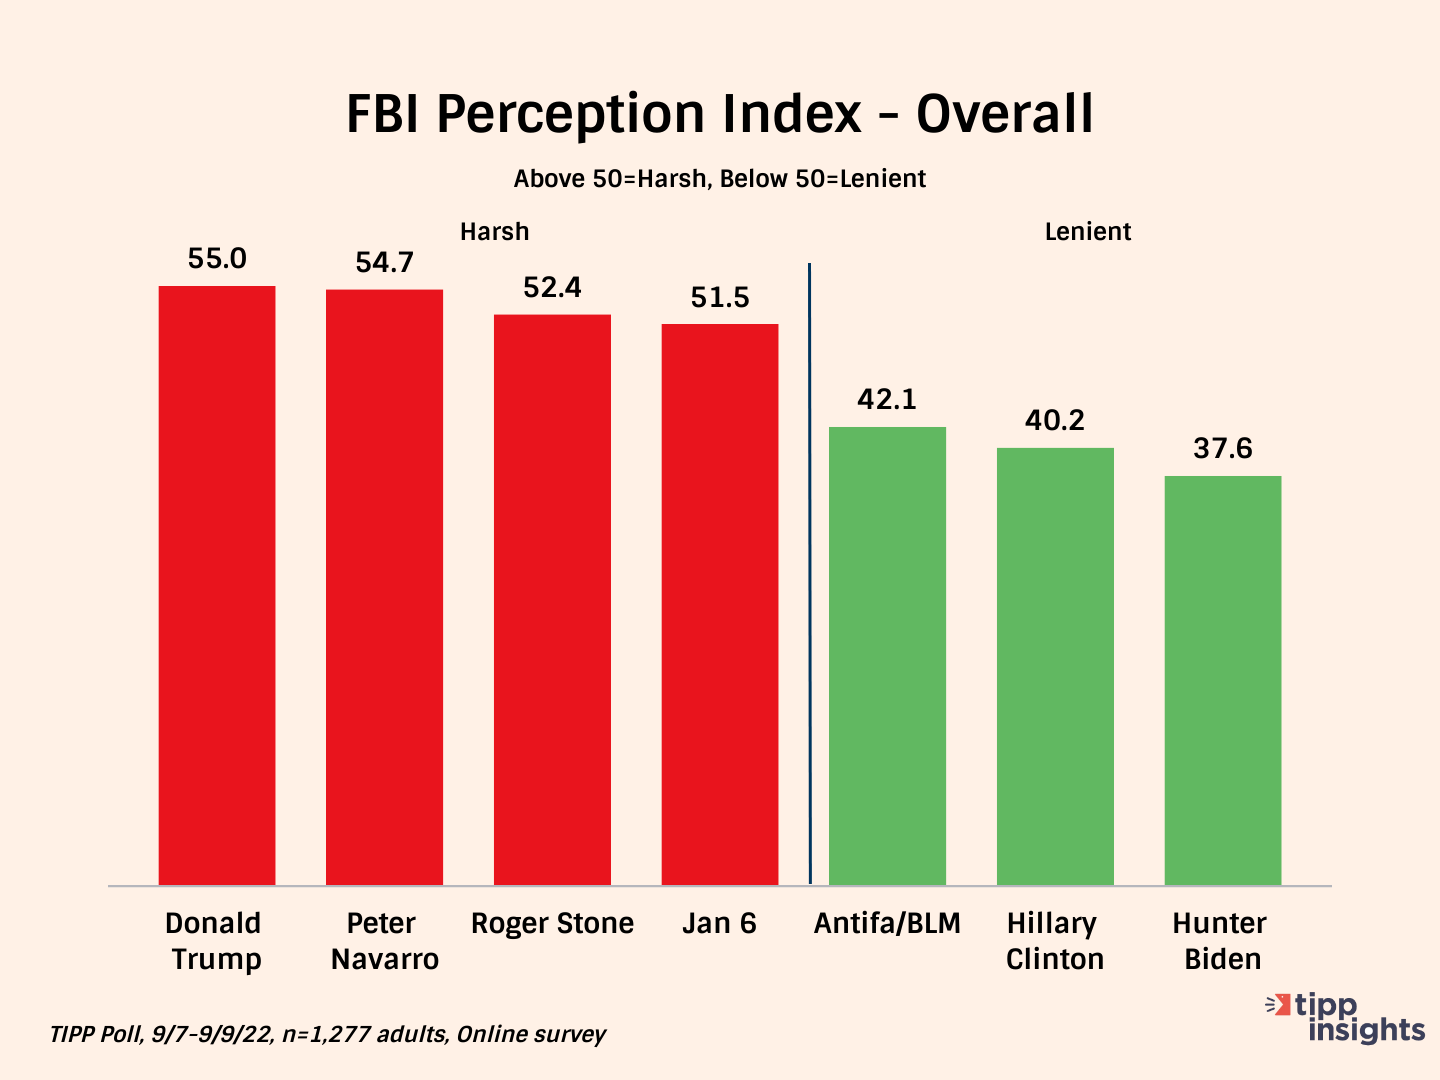 TIPP Poll Results 9/7-9/9/22: Americans overall perception of the FBI's handling of Donald Trump and related documents, Peter Navarro, Roger Stone, January 6th, Antifa/BLM, Hillar Clinton, Hunter Biden